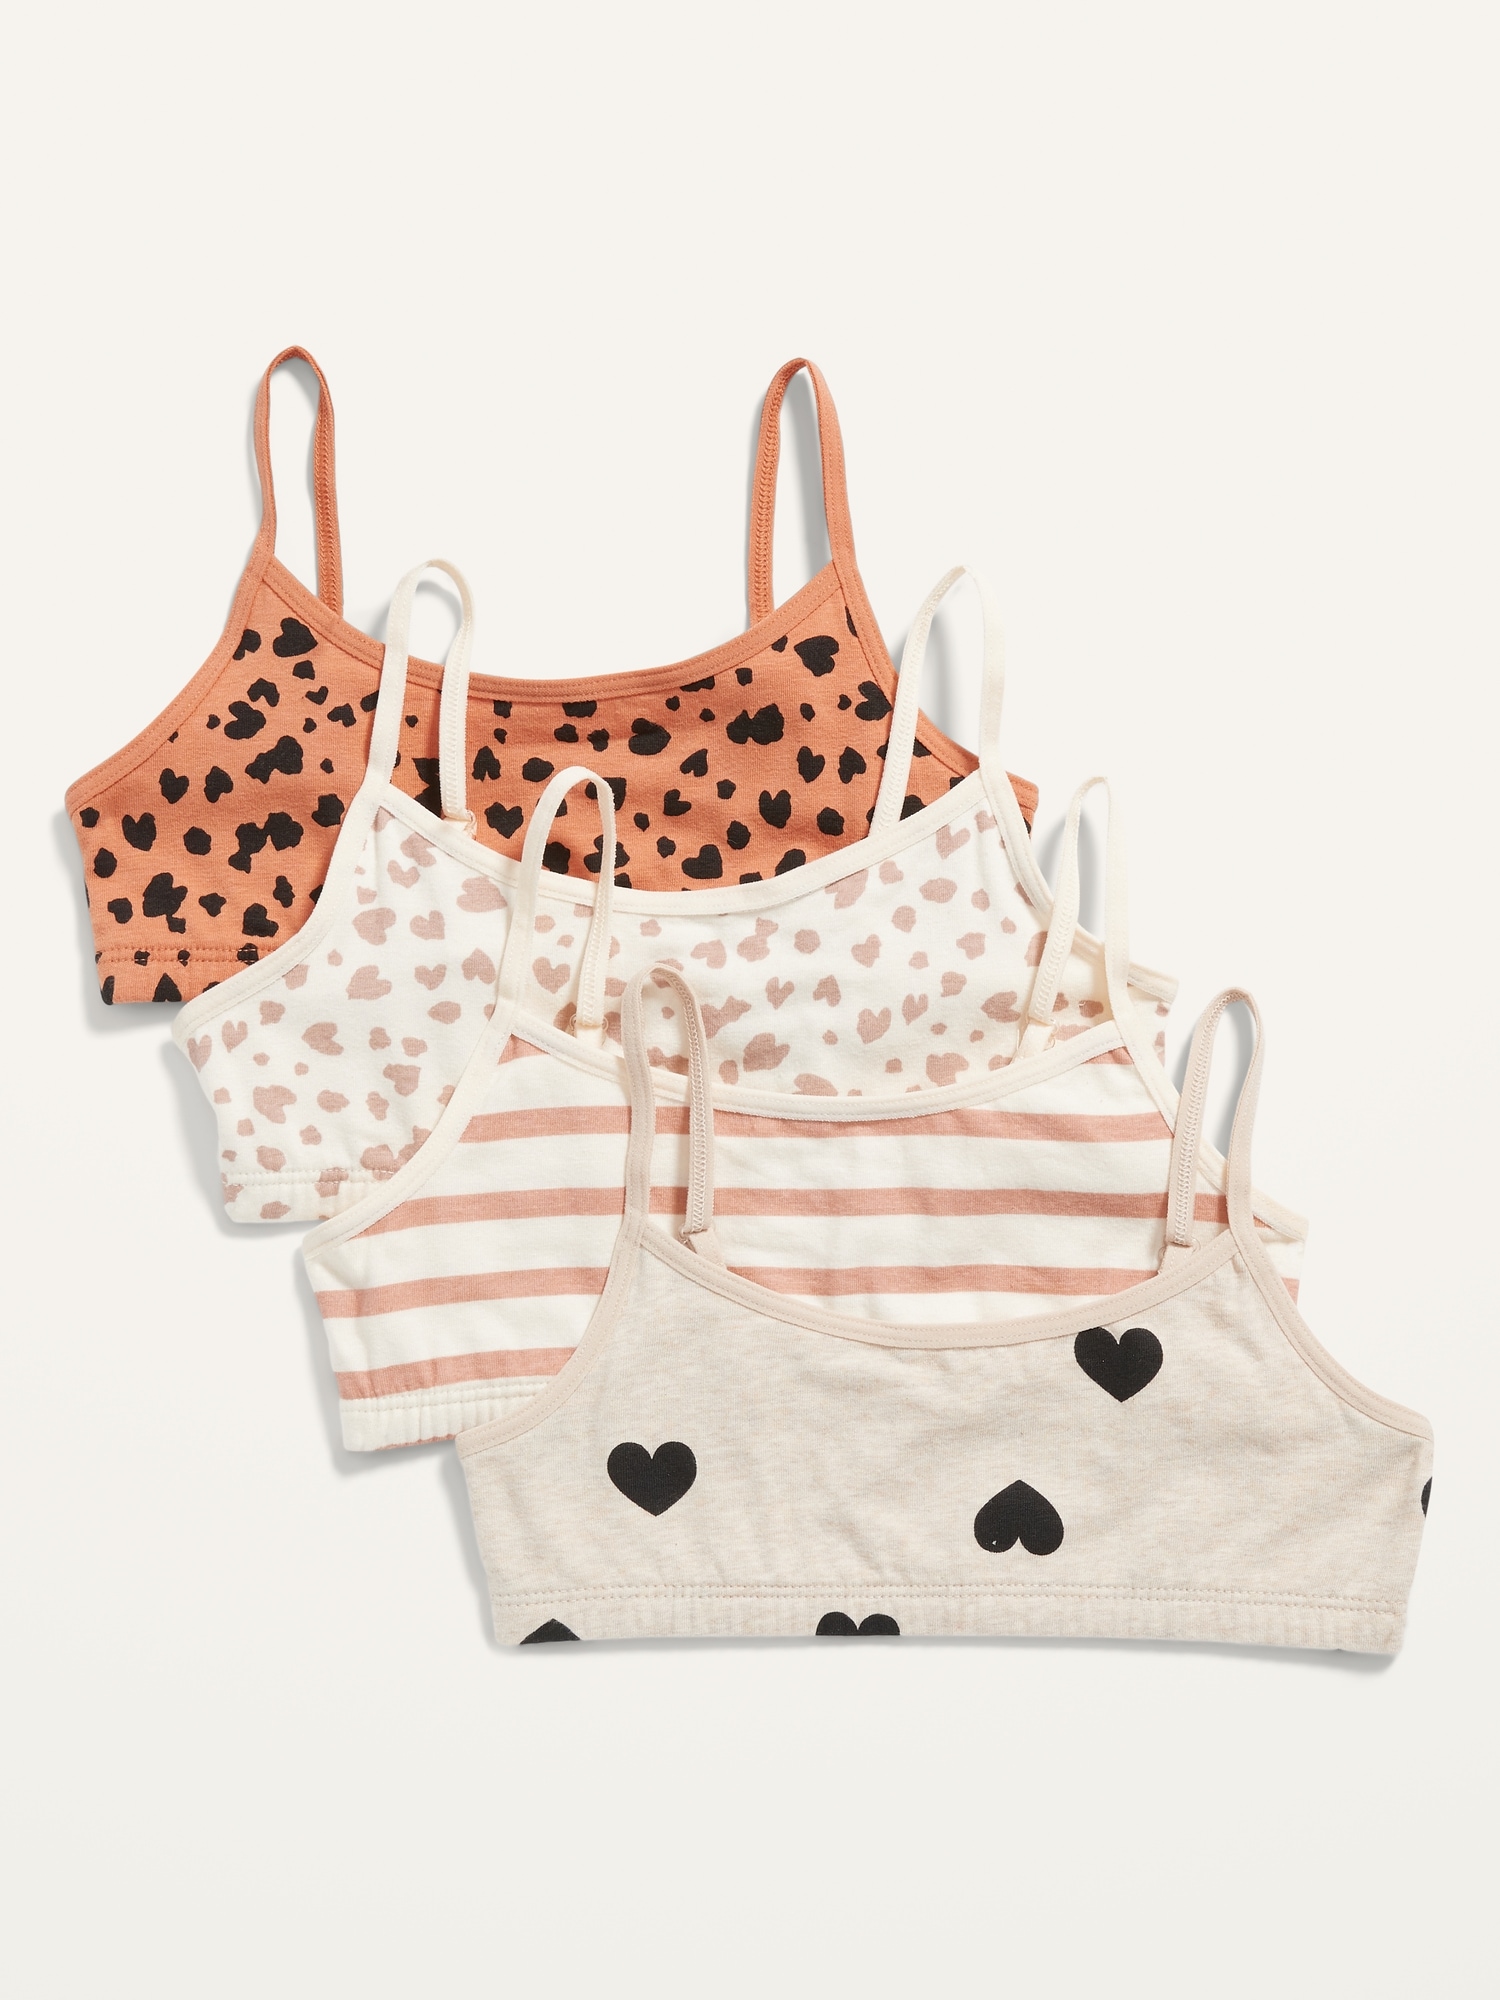 Patterned Jersey-Knit Cami Bra 4-Pack for Girls